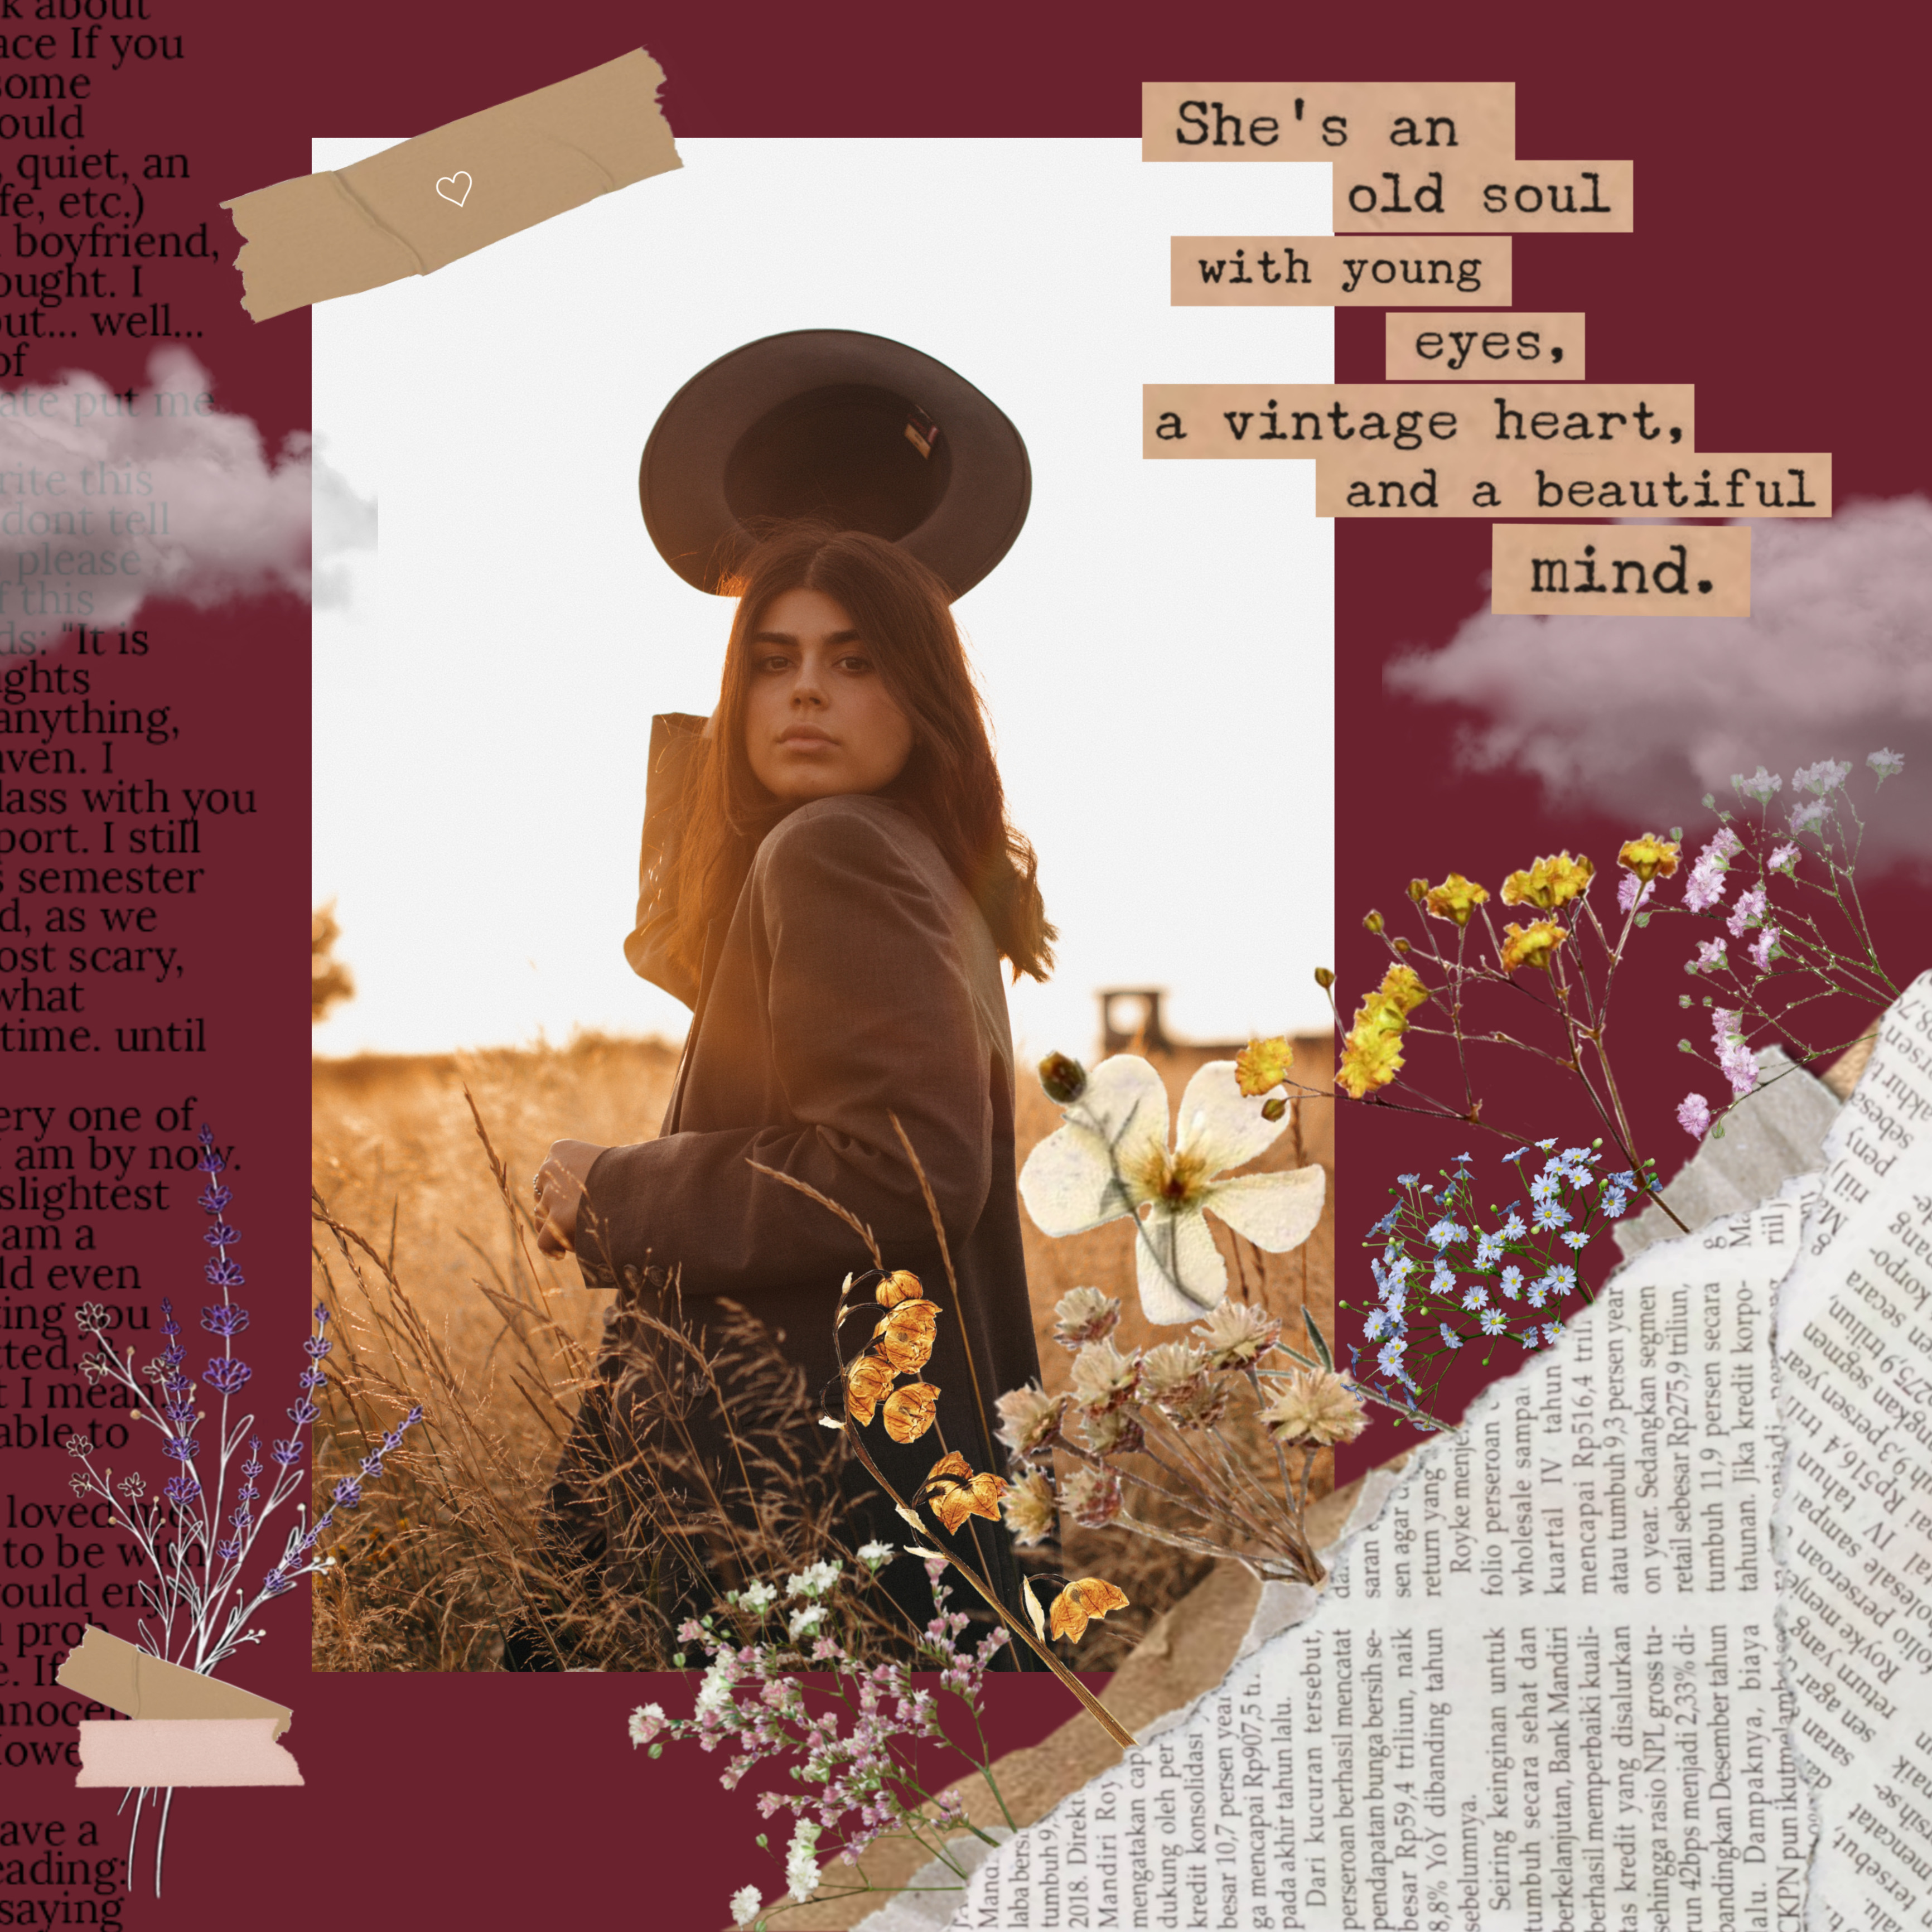 #replay #girl #person #hat #nature #beautiful #flowers #clouds #tape #newspaper #words #text #quote #maroon